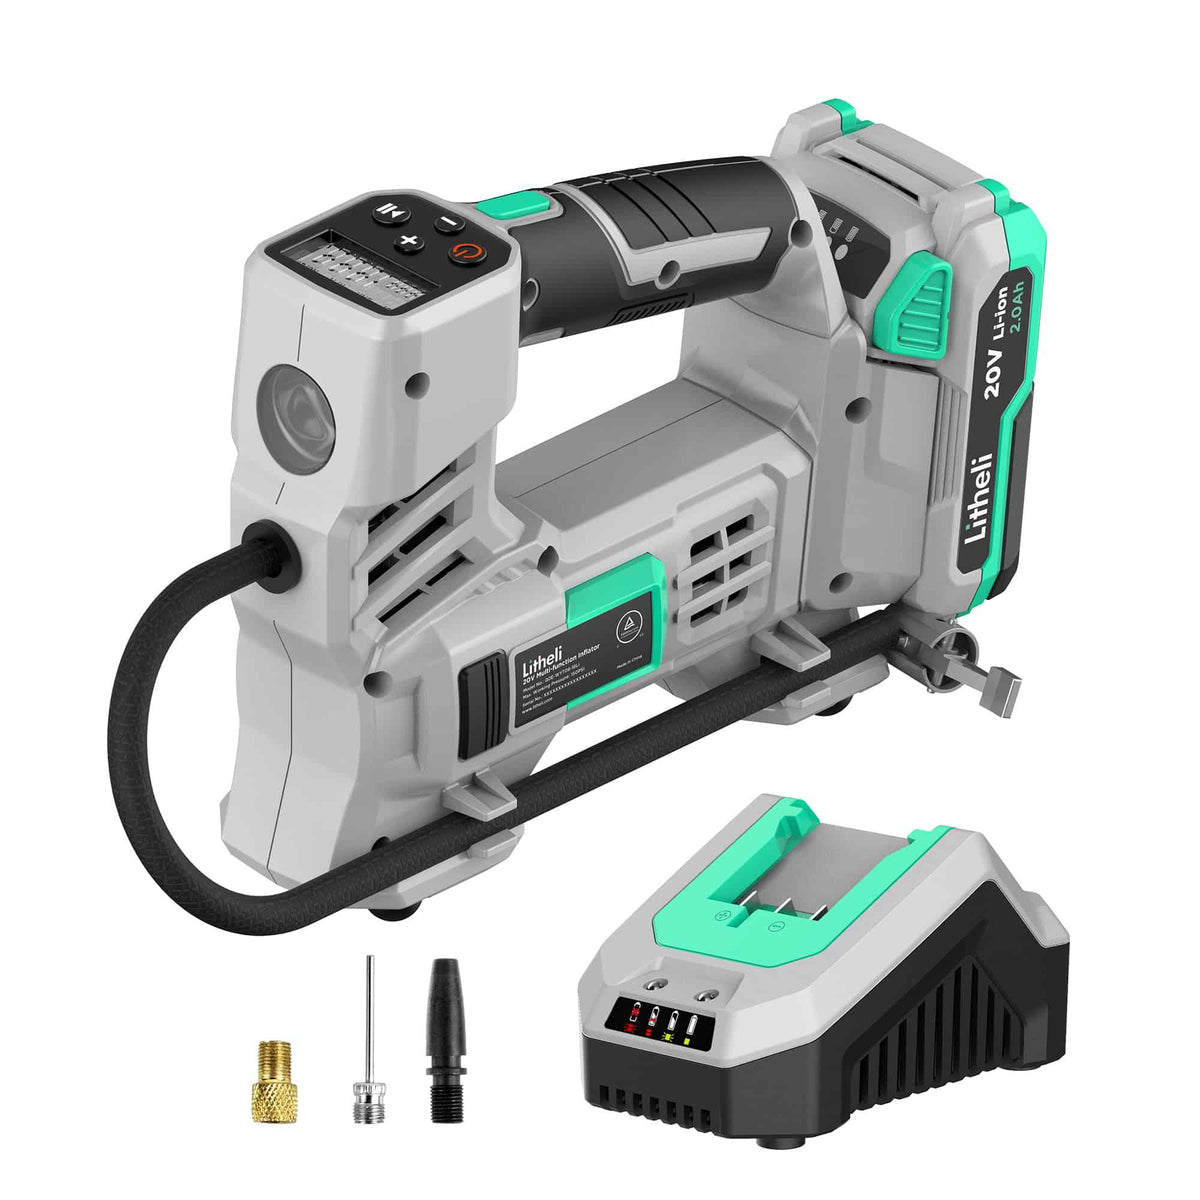 Litheli 20V Cordless Multi-function Inflator + 2.0Ah Battery & Charger